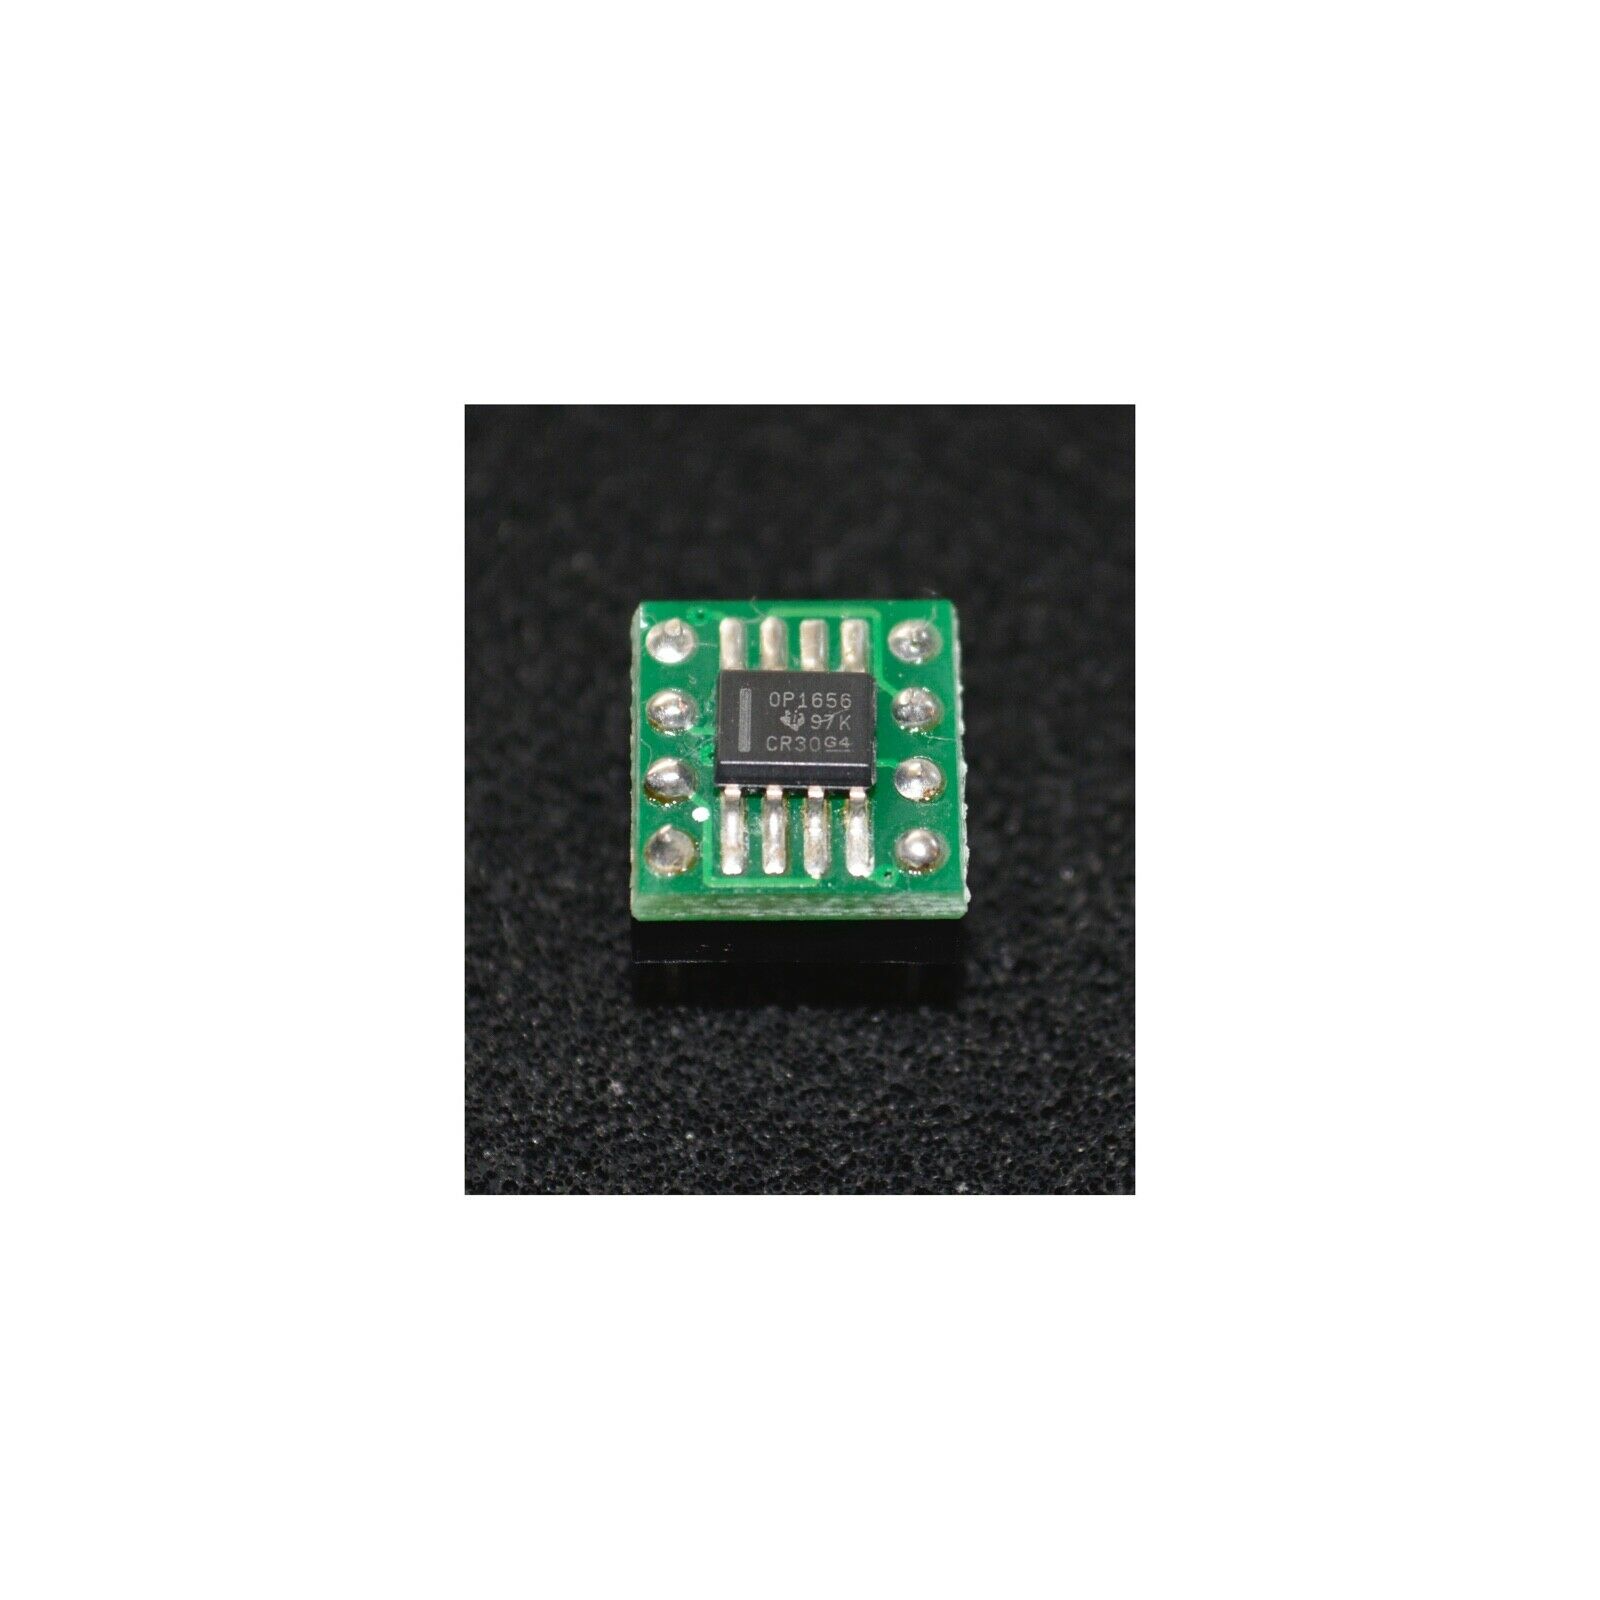 Opa1656 Dip8 Ultra Low Noise And Distortion Fet-input Audio Operational Amplifie